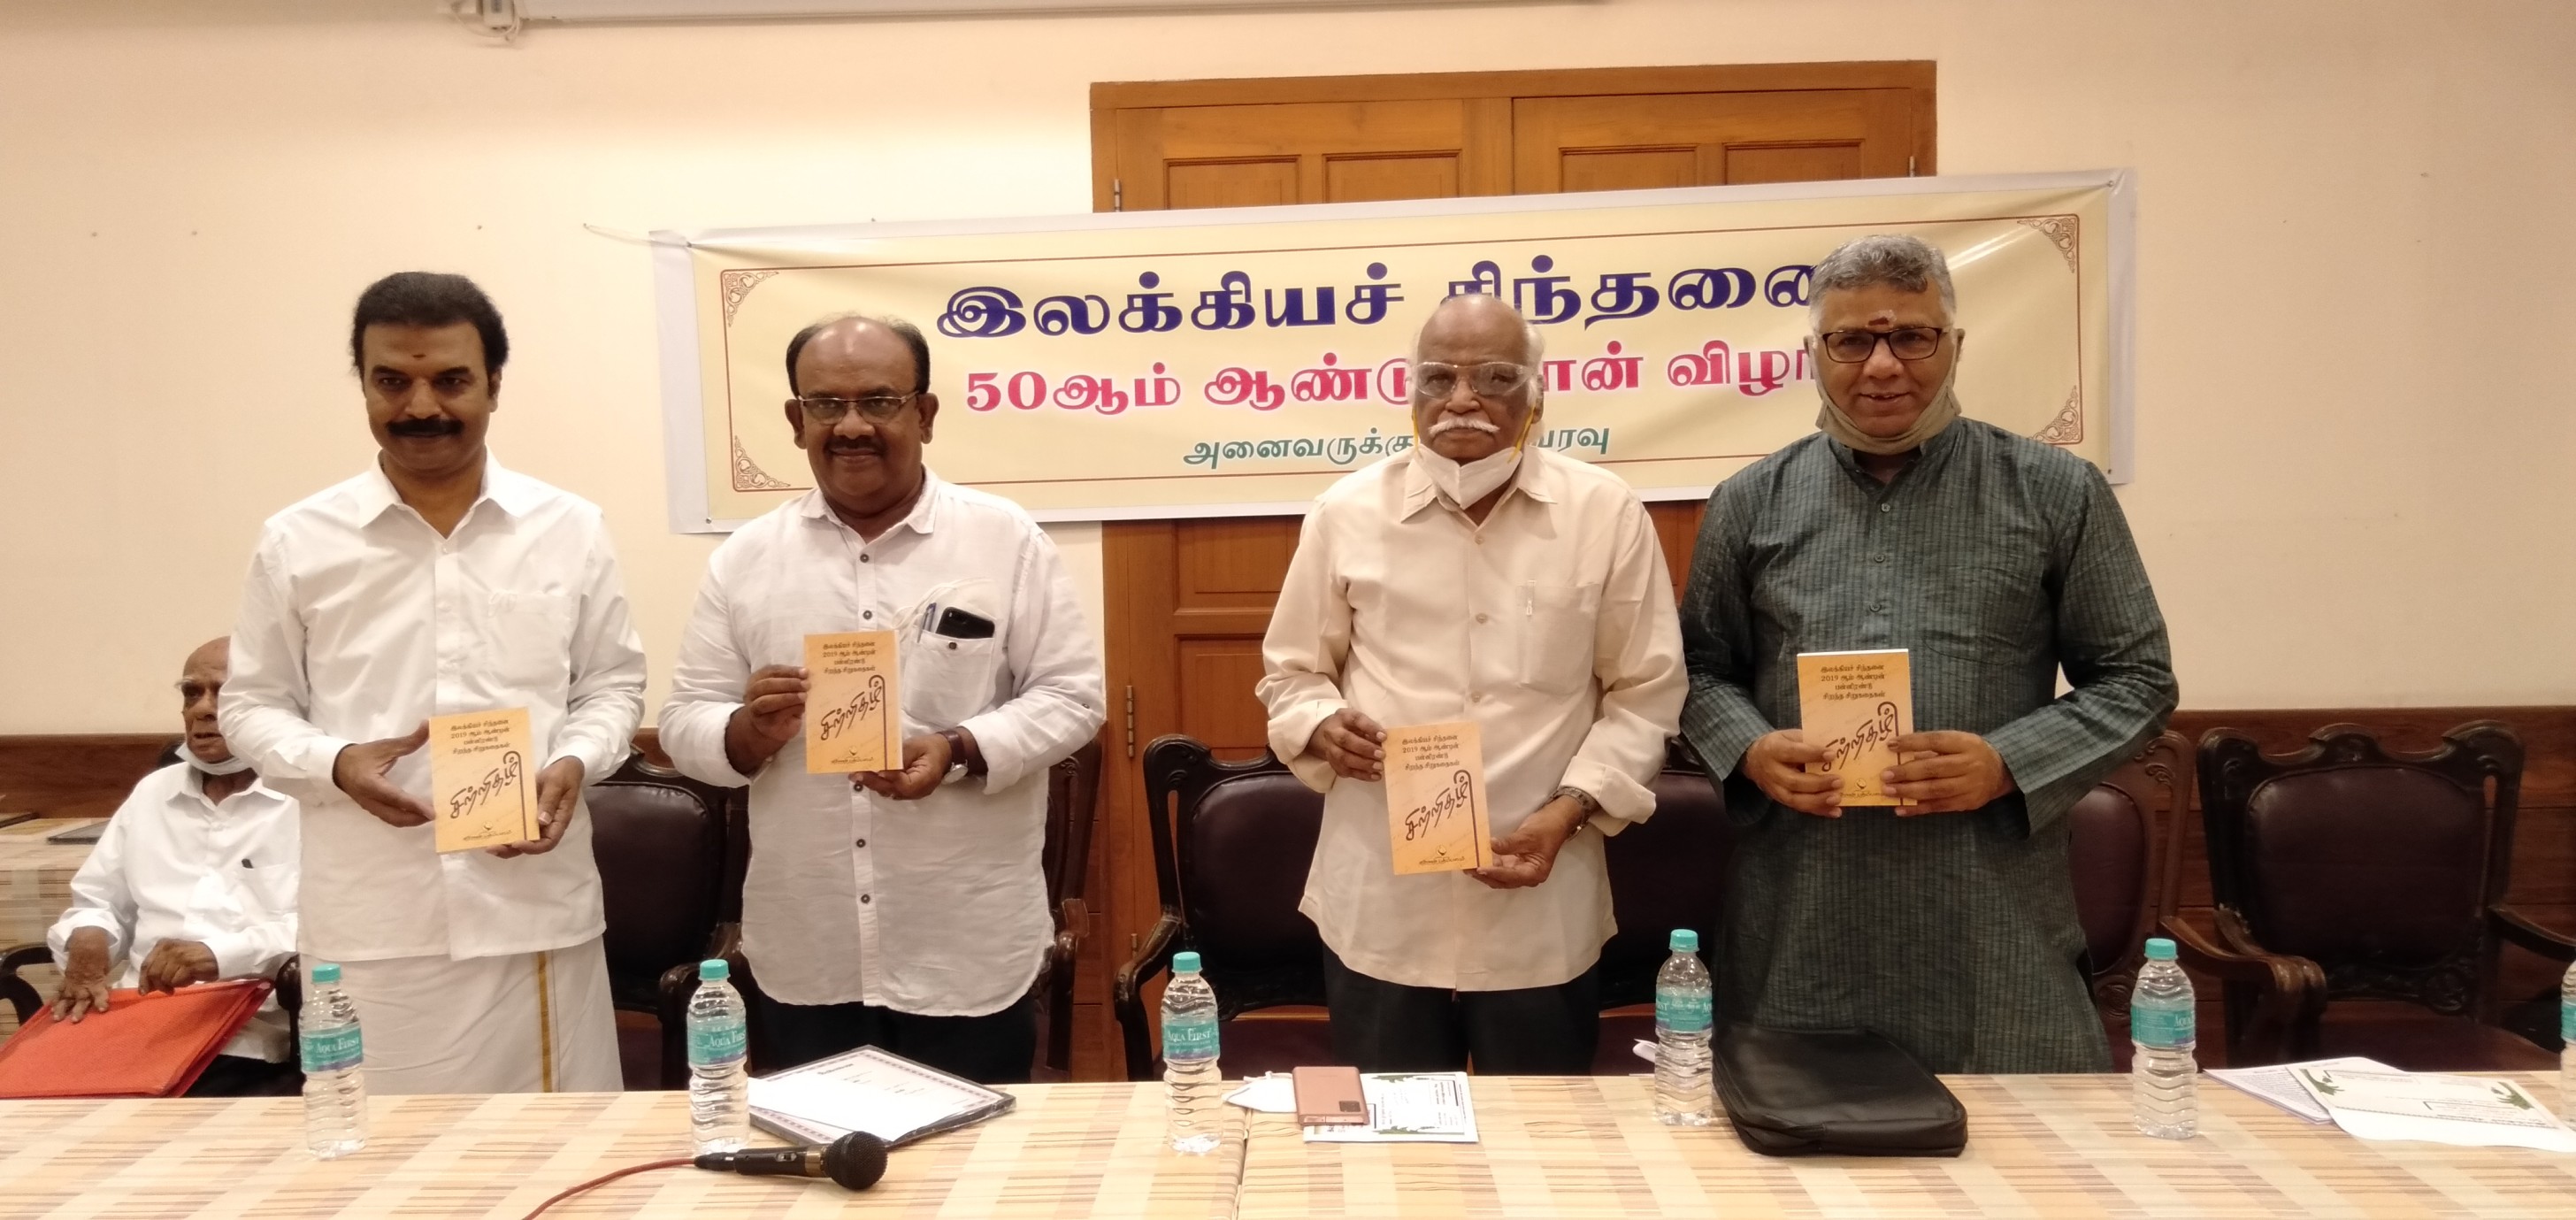 A Tamil literary organisation devoted to short stories for 50 years